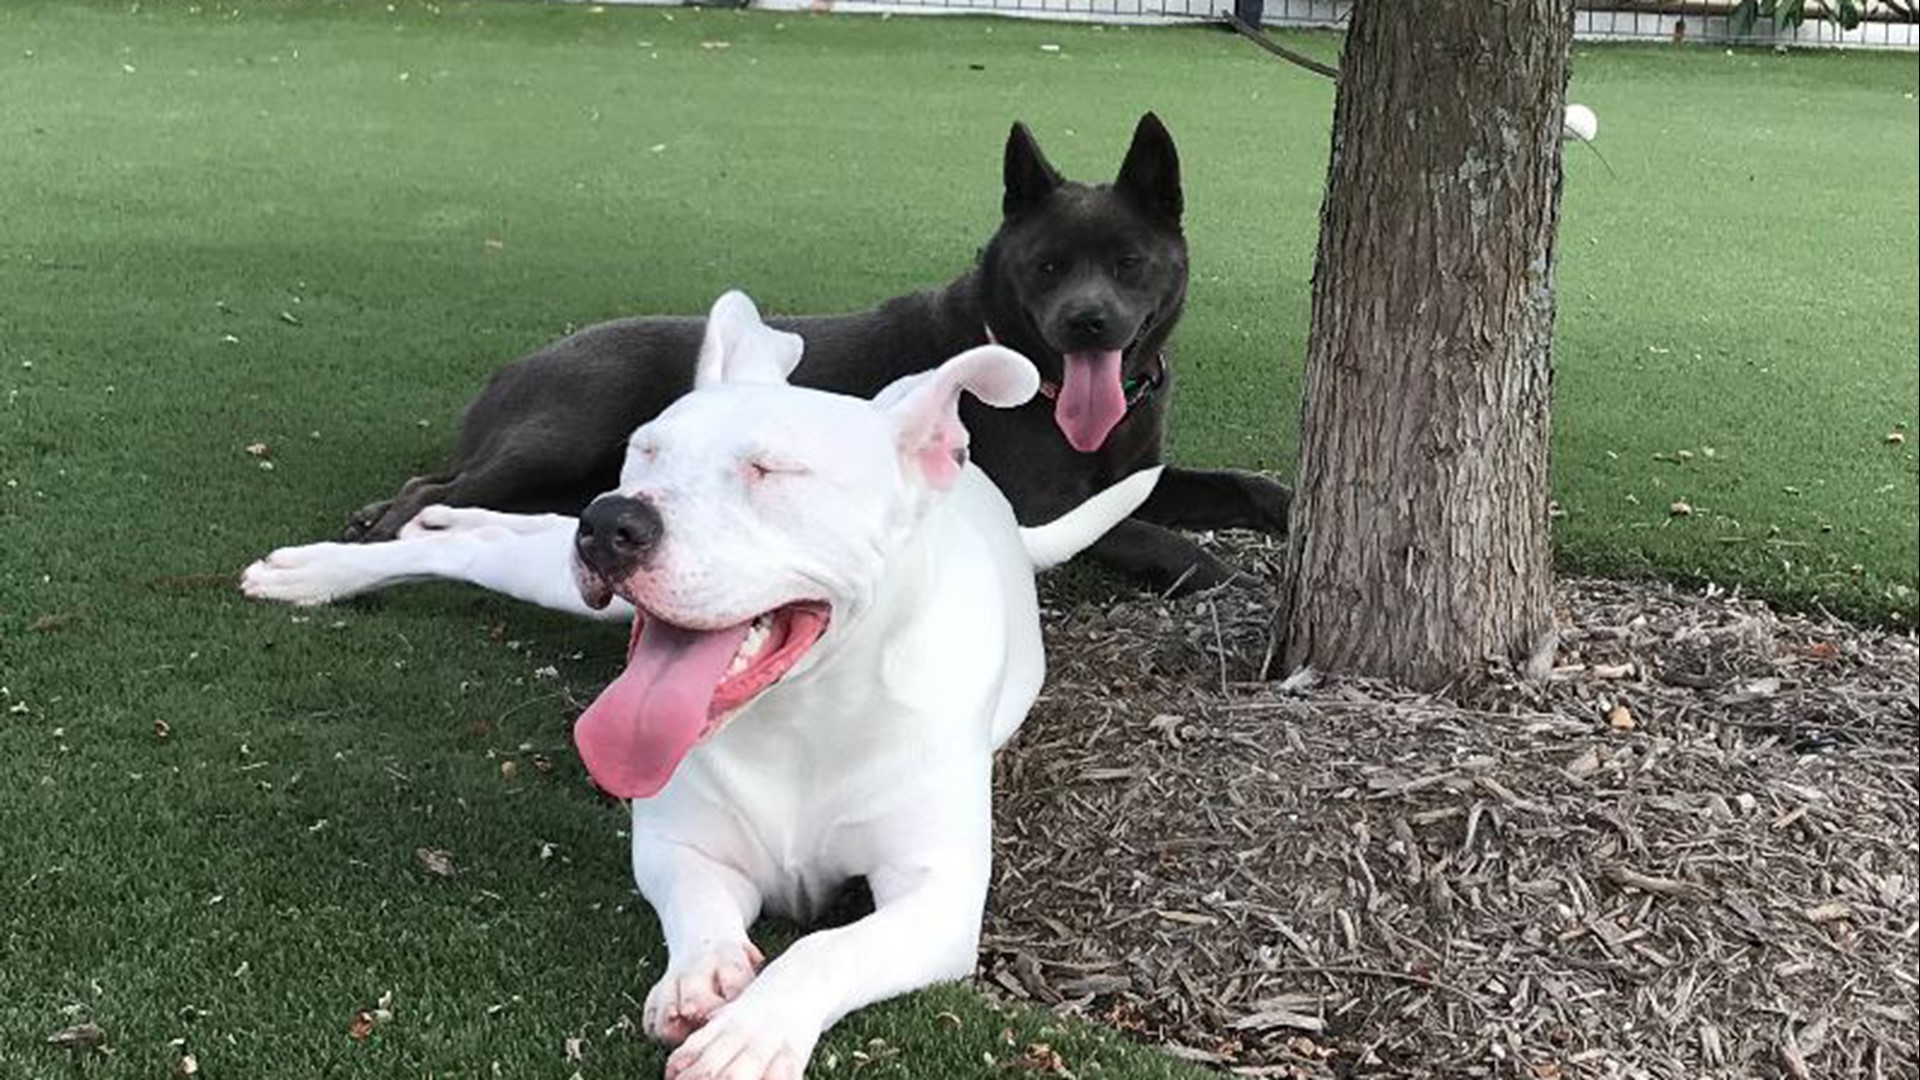 Whisper and Sassy were separated after being rescued from Louisiana in advance of Hurricane Sally, but they're together again thanks to the Houston SPCA.